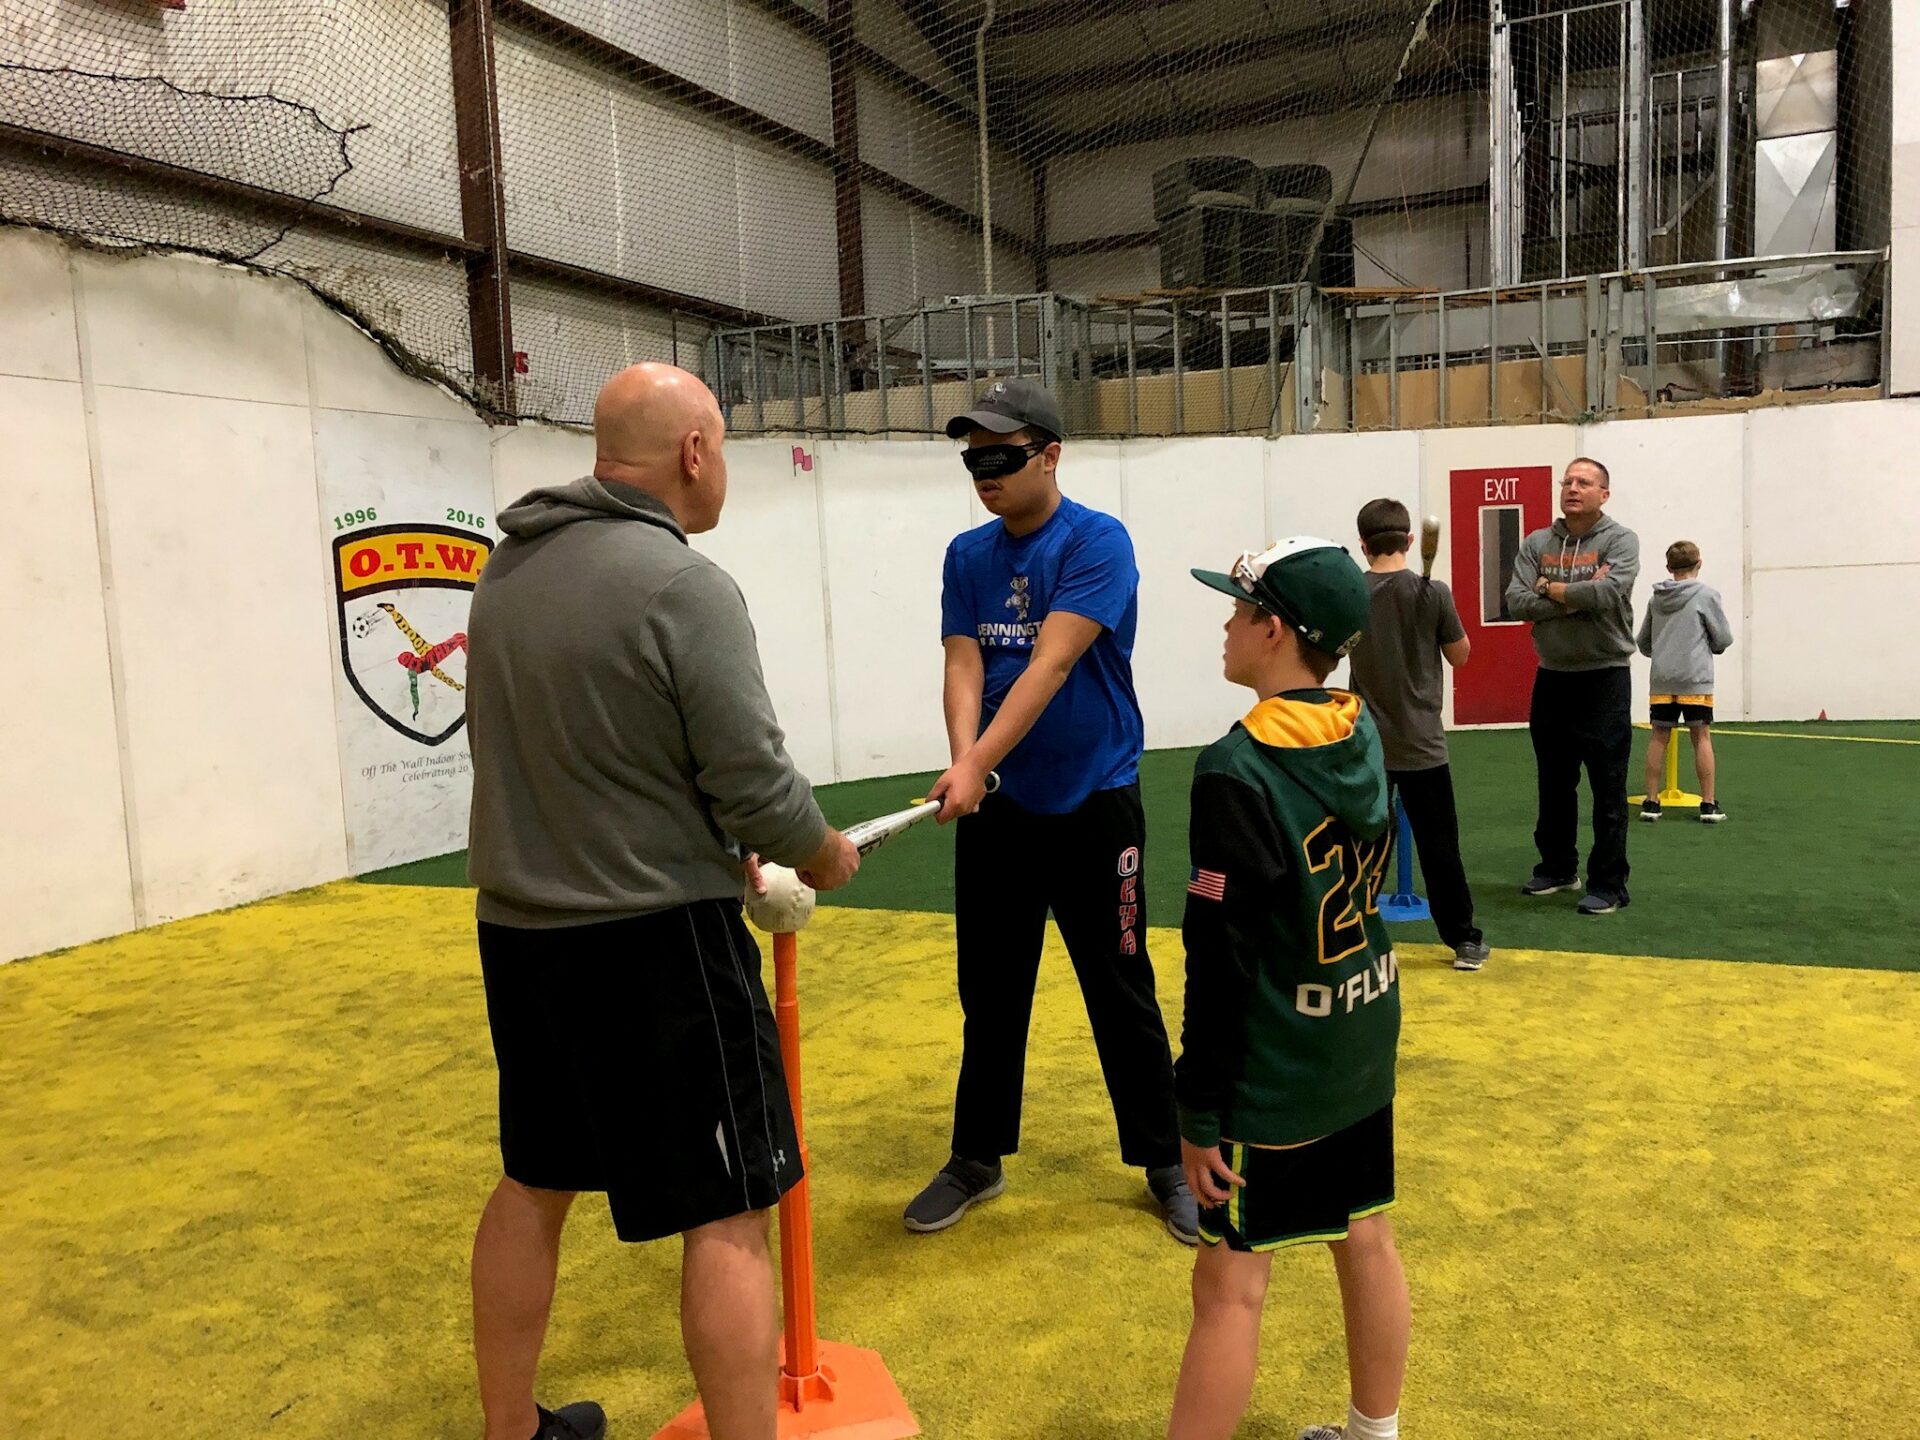 Adaptive Sports Specialist, Mike Messerole, gives a visually impaired teen some pointers on batting. He is holding a bat in his hands, lined up with the tee and ball. A sighted little league player watches them practicing.